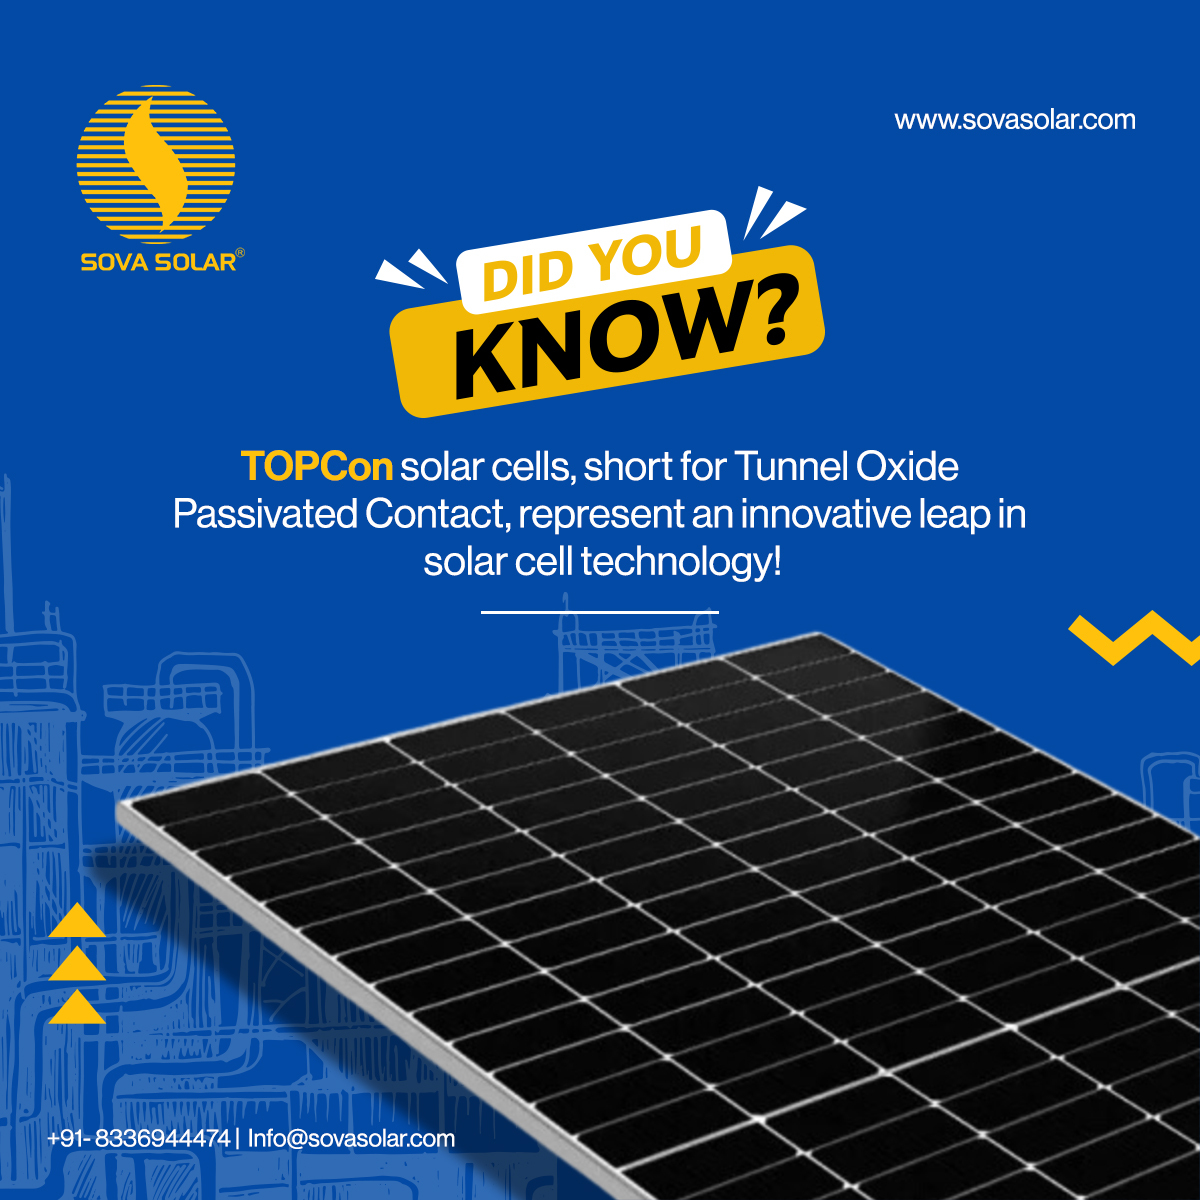 TOPCon cells are designed to enhance efficiency and reliability in solar energy production. These cells feature a unique structure with a tunneling oxide layer that reduces recombination losses, leading to increased cell efficiency. 

#sovasolar